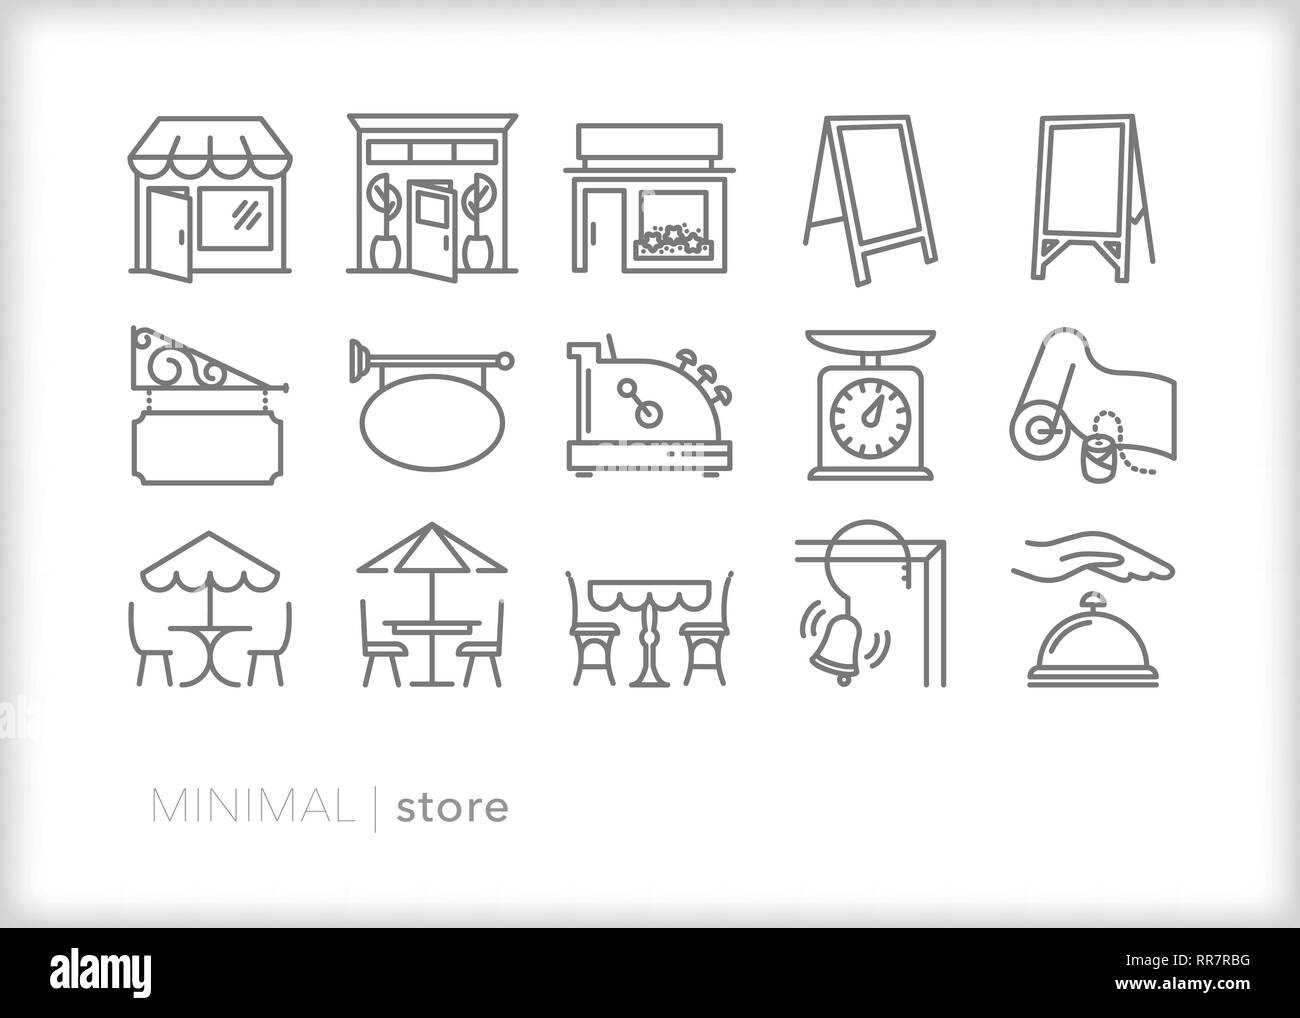 Set of 15 shop line icons for small business shops and cafes Stock Vector